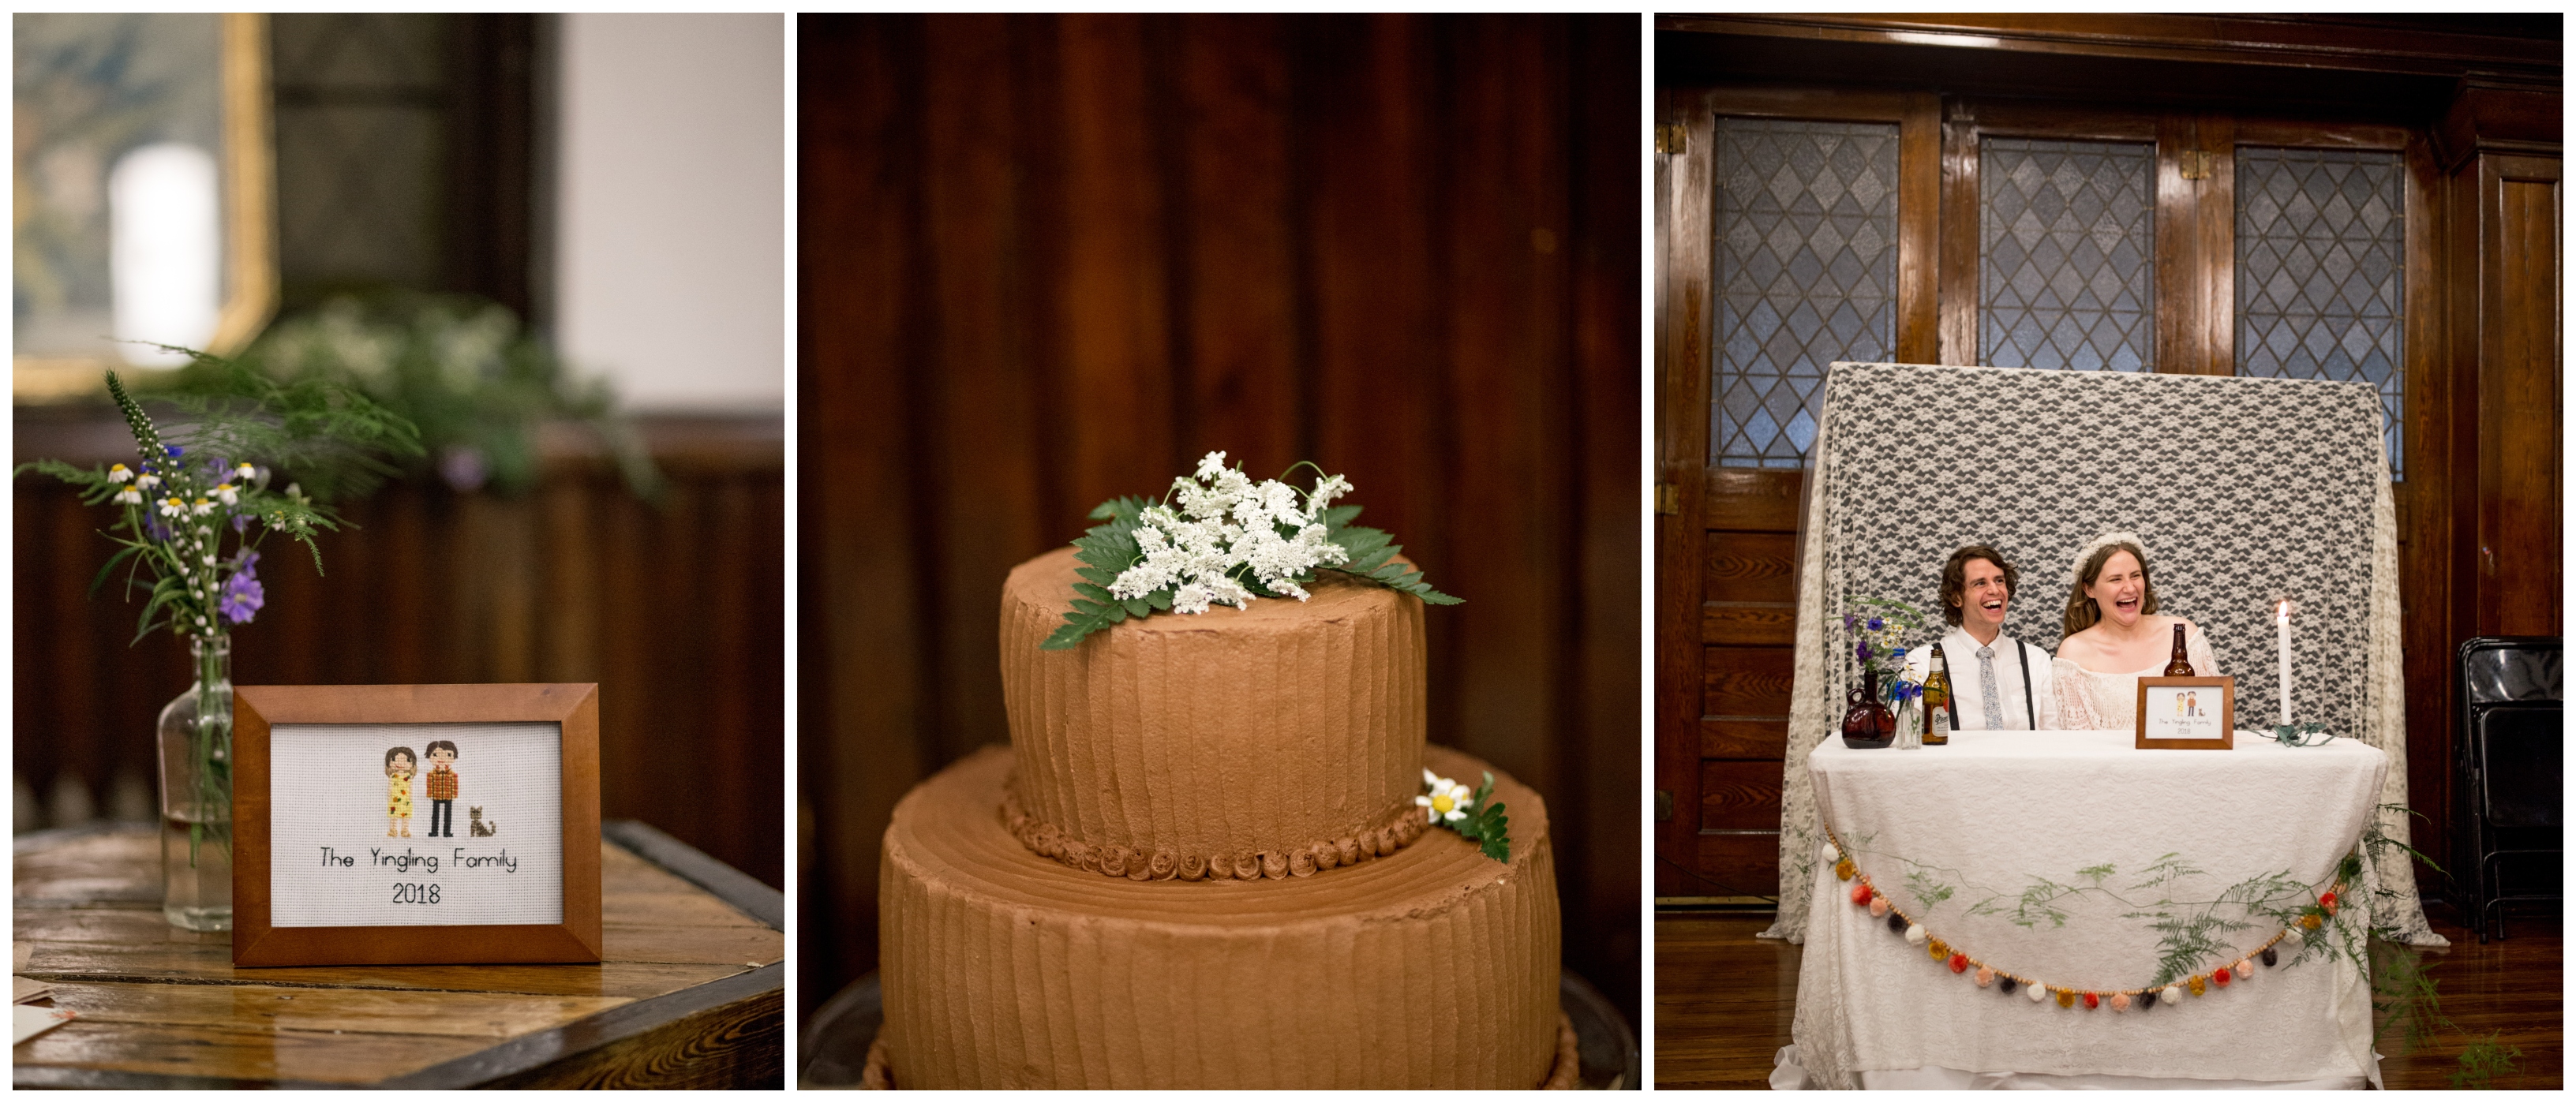 simple wedding cake and details